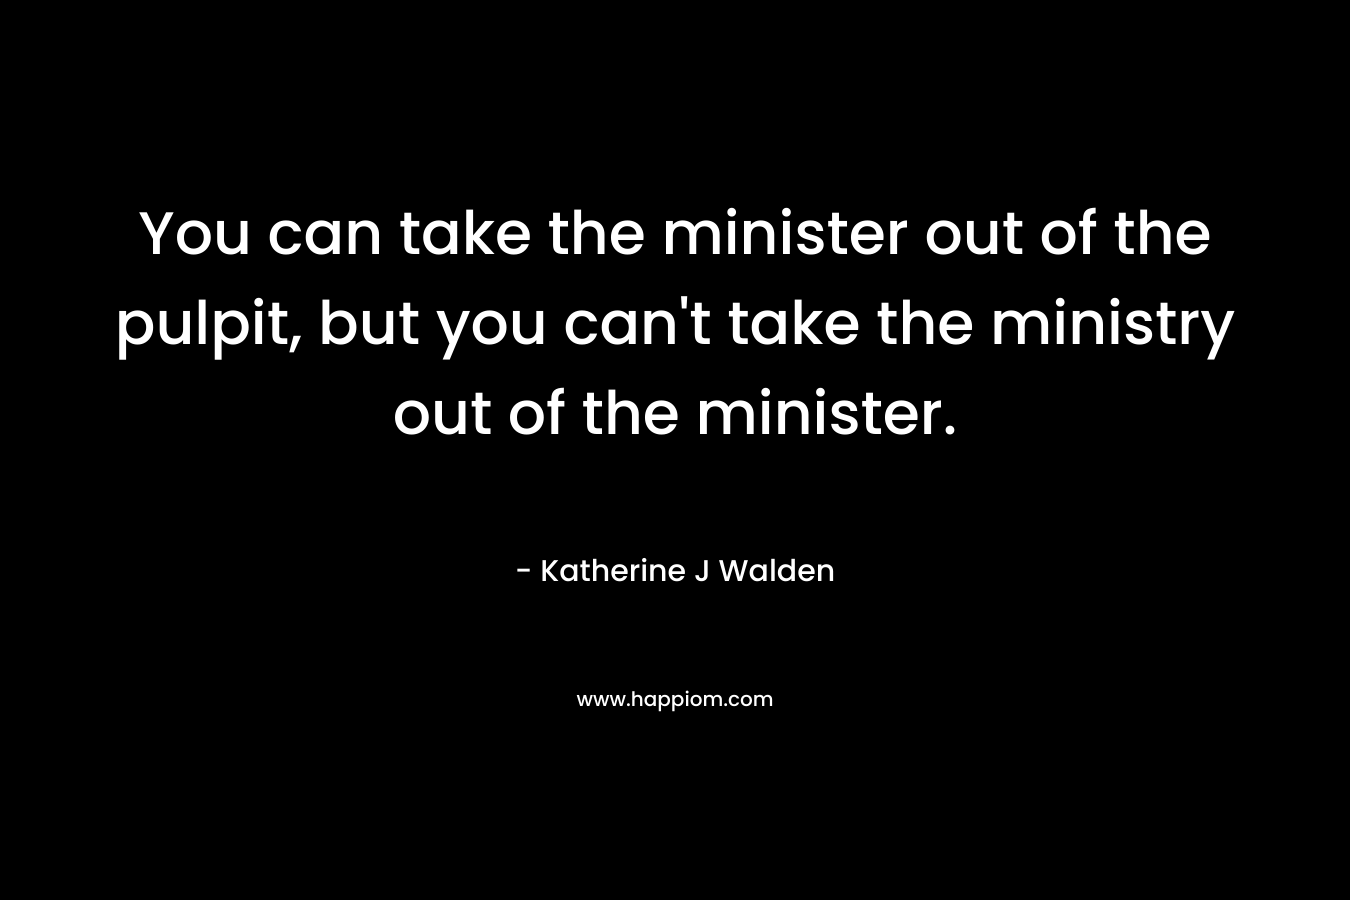 You can take the minister out of the pulpit, but you can’t take the ministry out of the minister. – Katherine J Walden